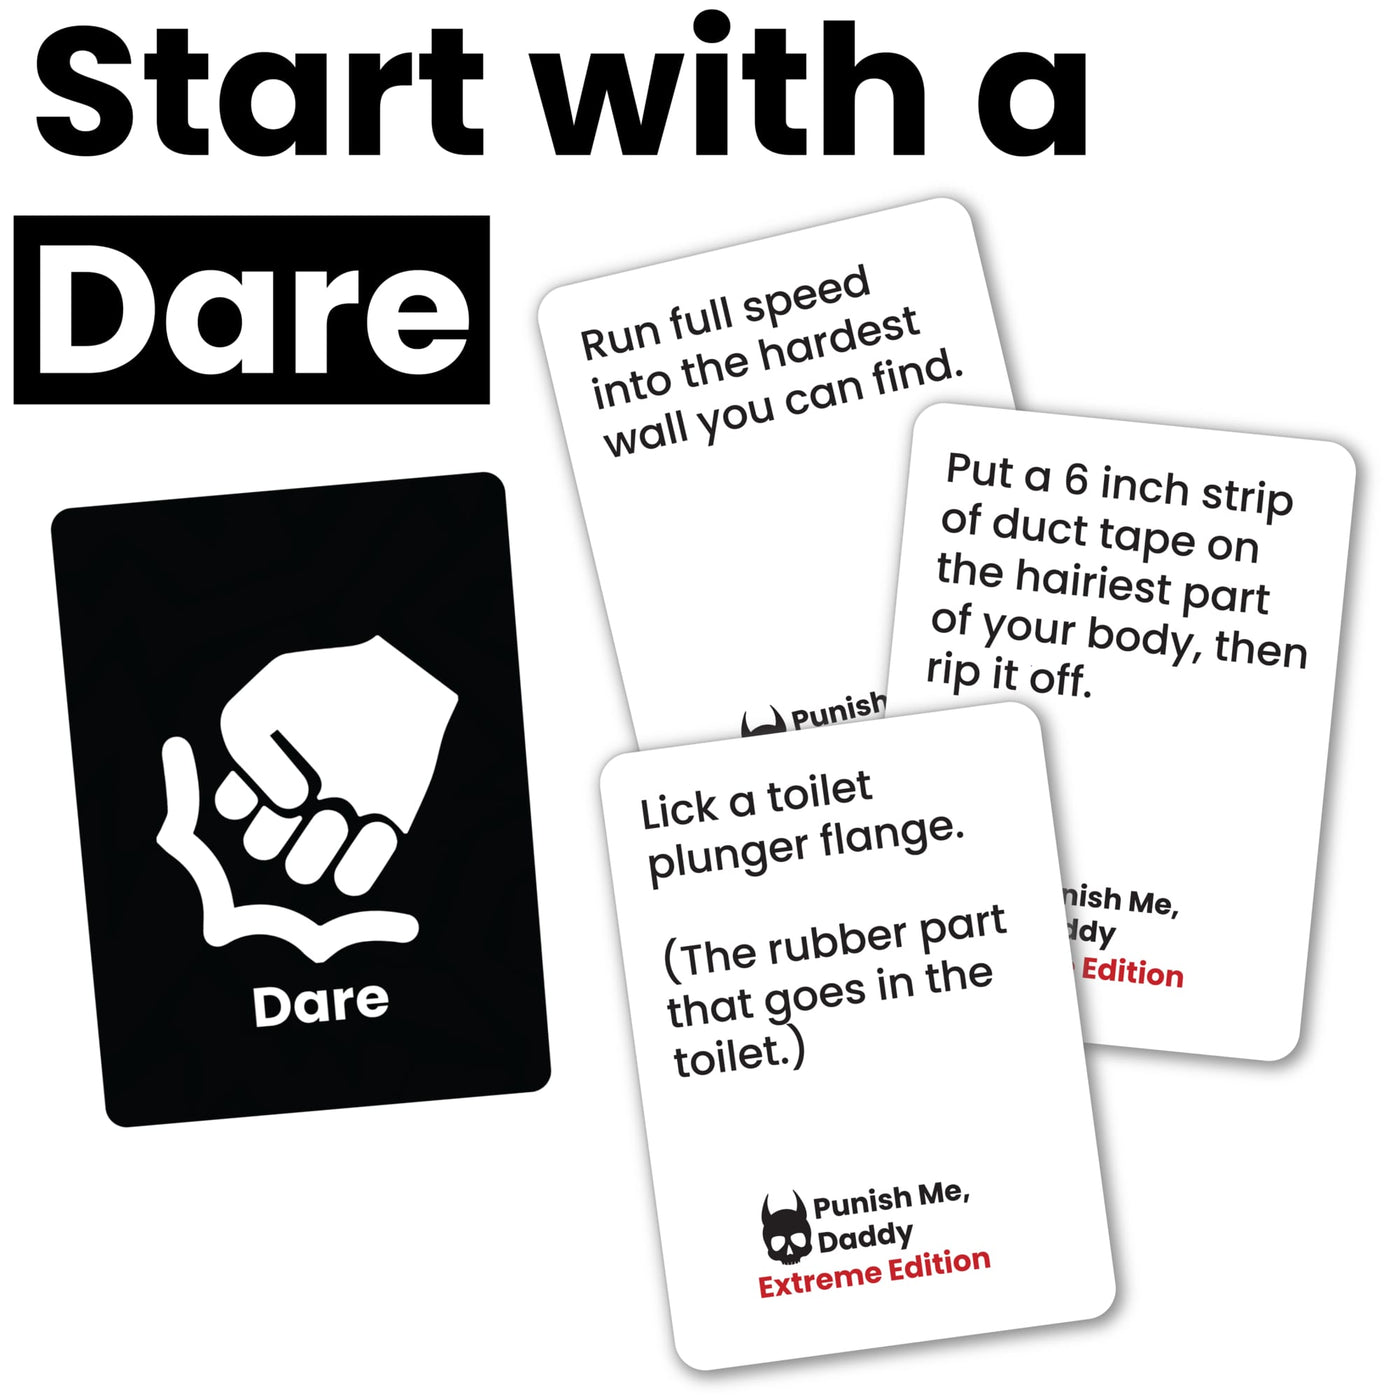 Punish Me, Daddy: Extreme Edition Dare card with 3 examples